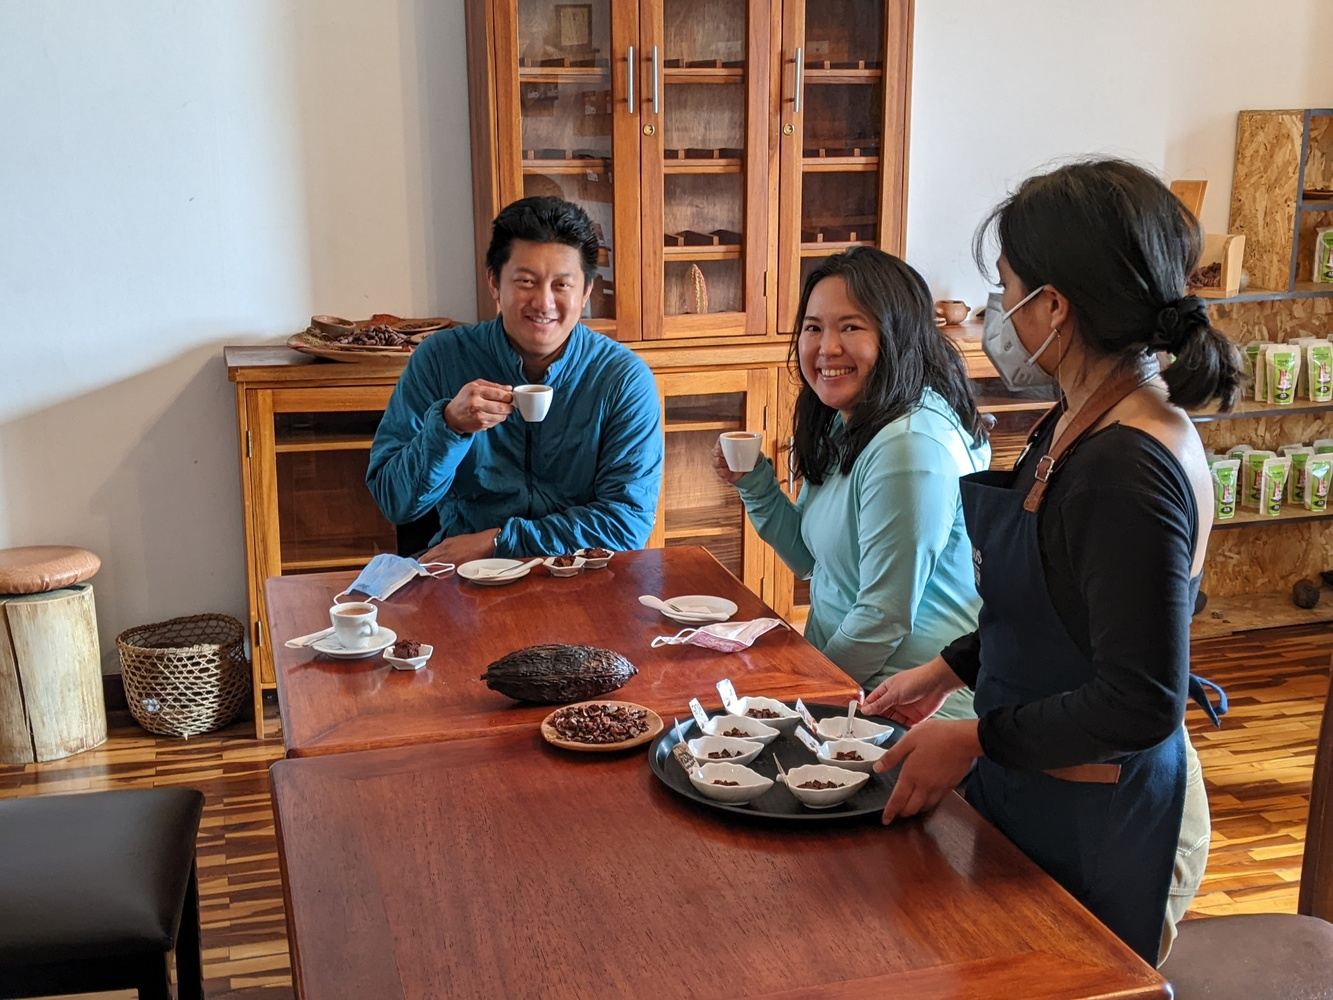 Afternoon Coffee in Quito - Foodie Tour with empanada cooking class